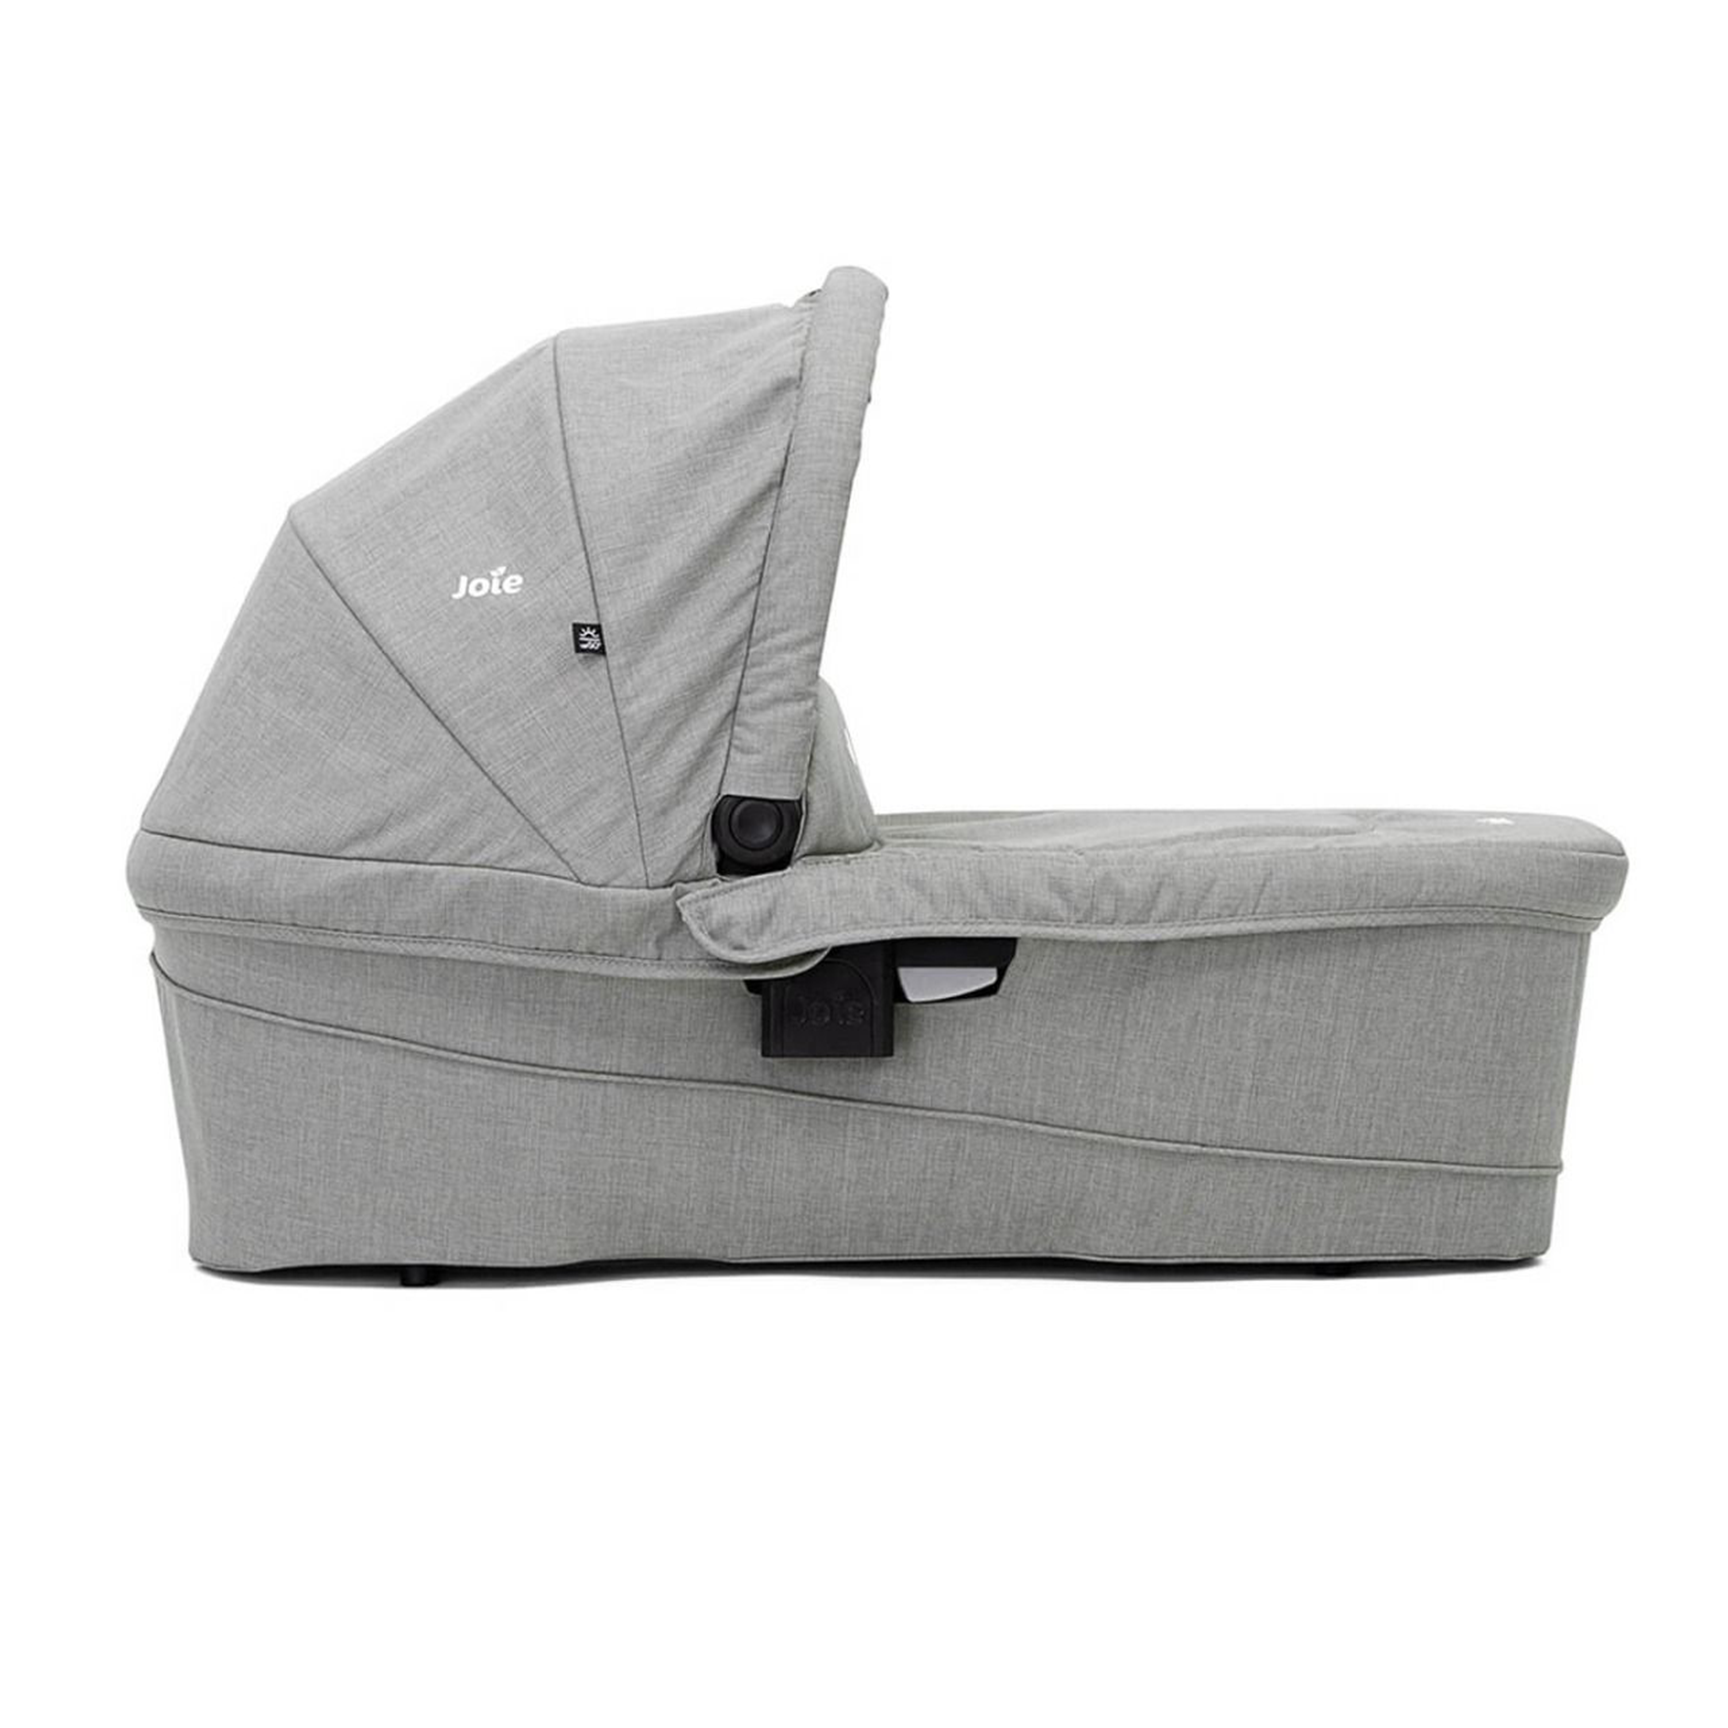 Joie Chassis & Carrycots Joie Ramble XL Carrycot - Pebble A1219PDPEB000